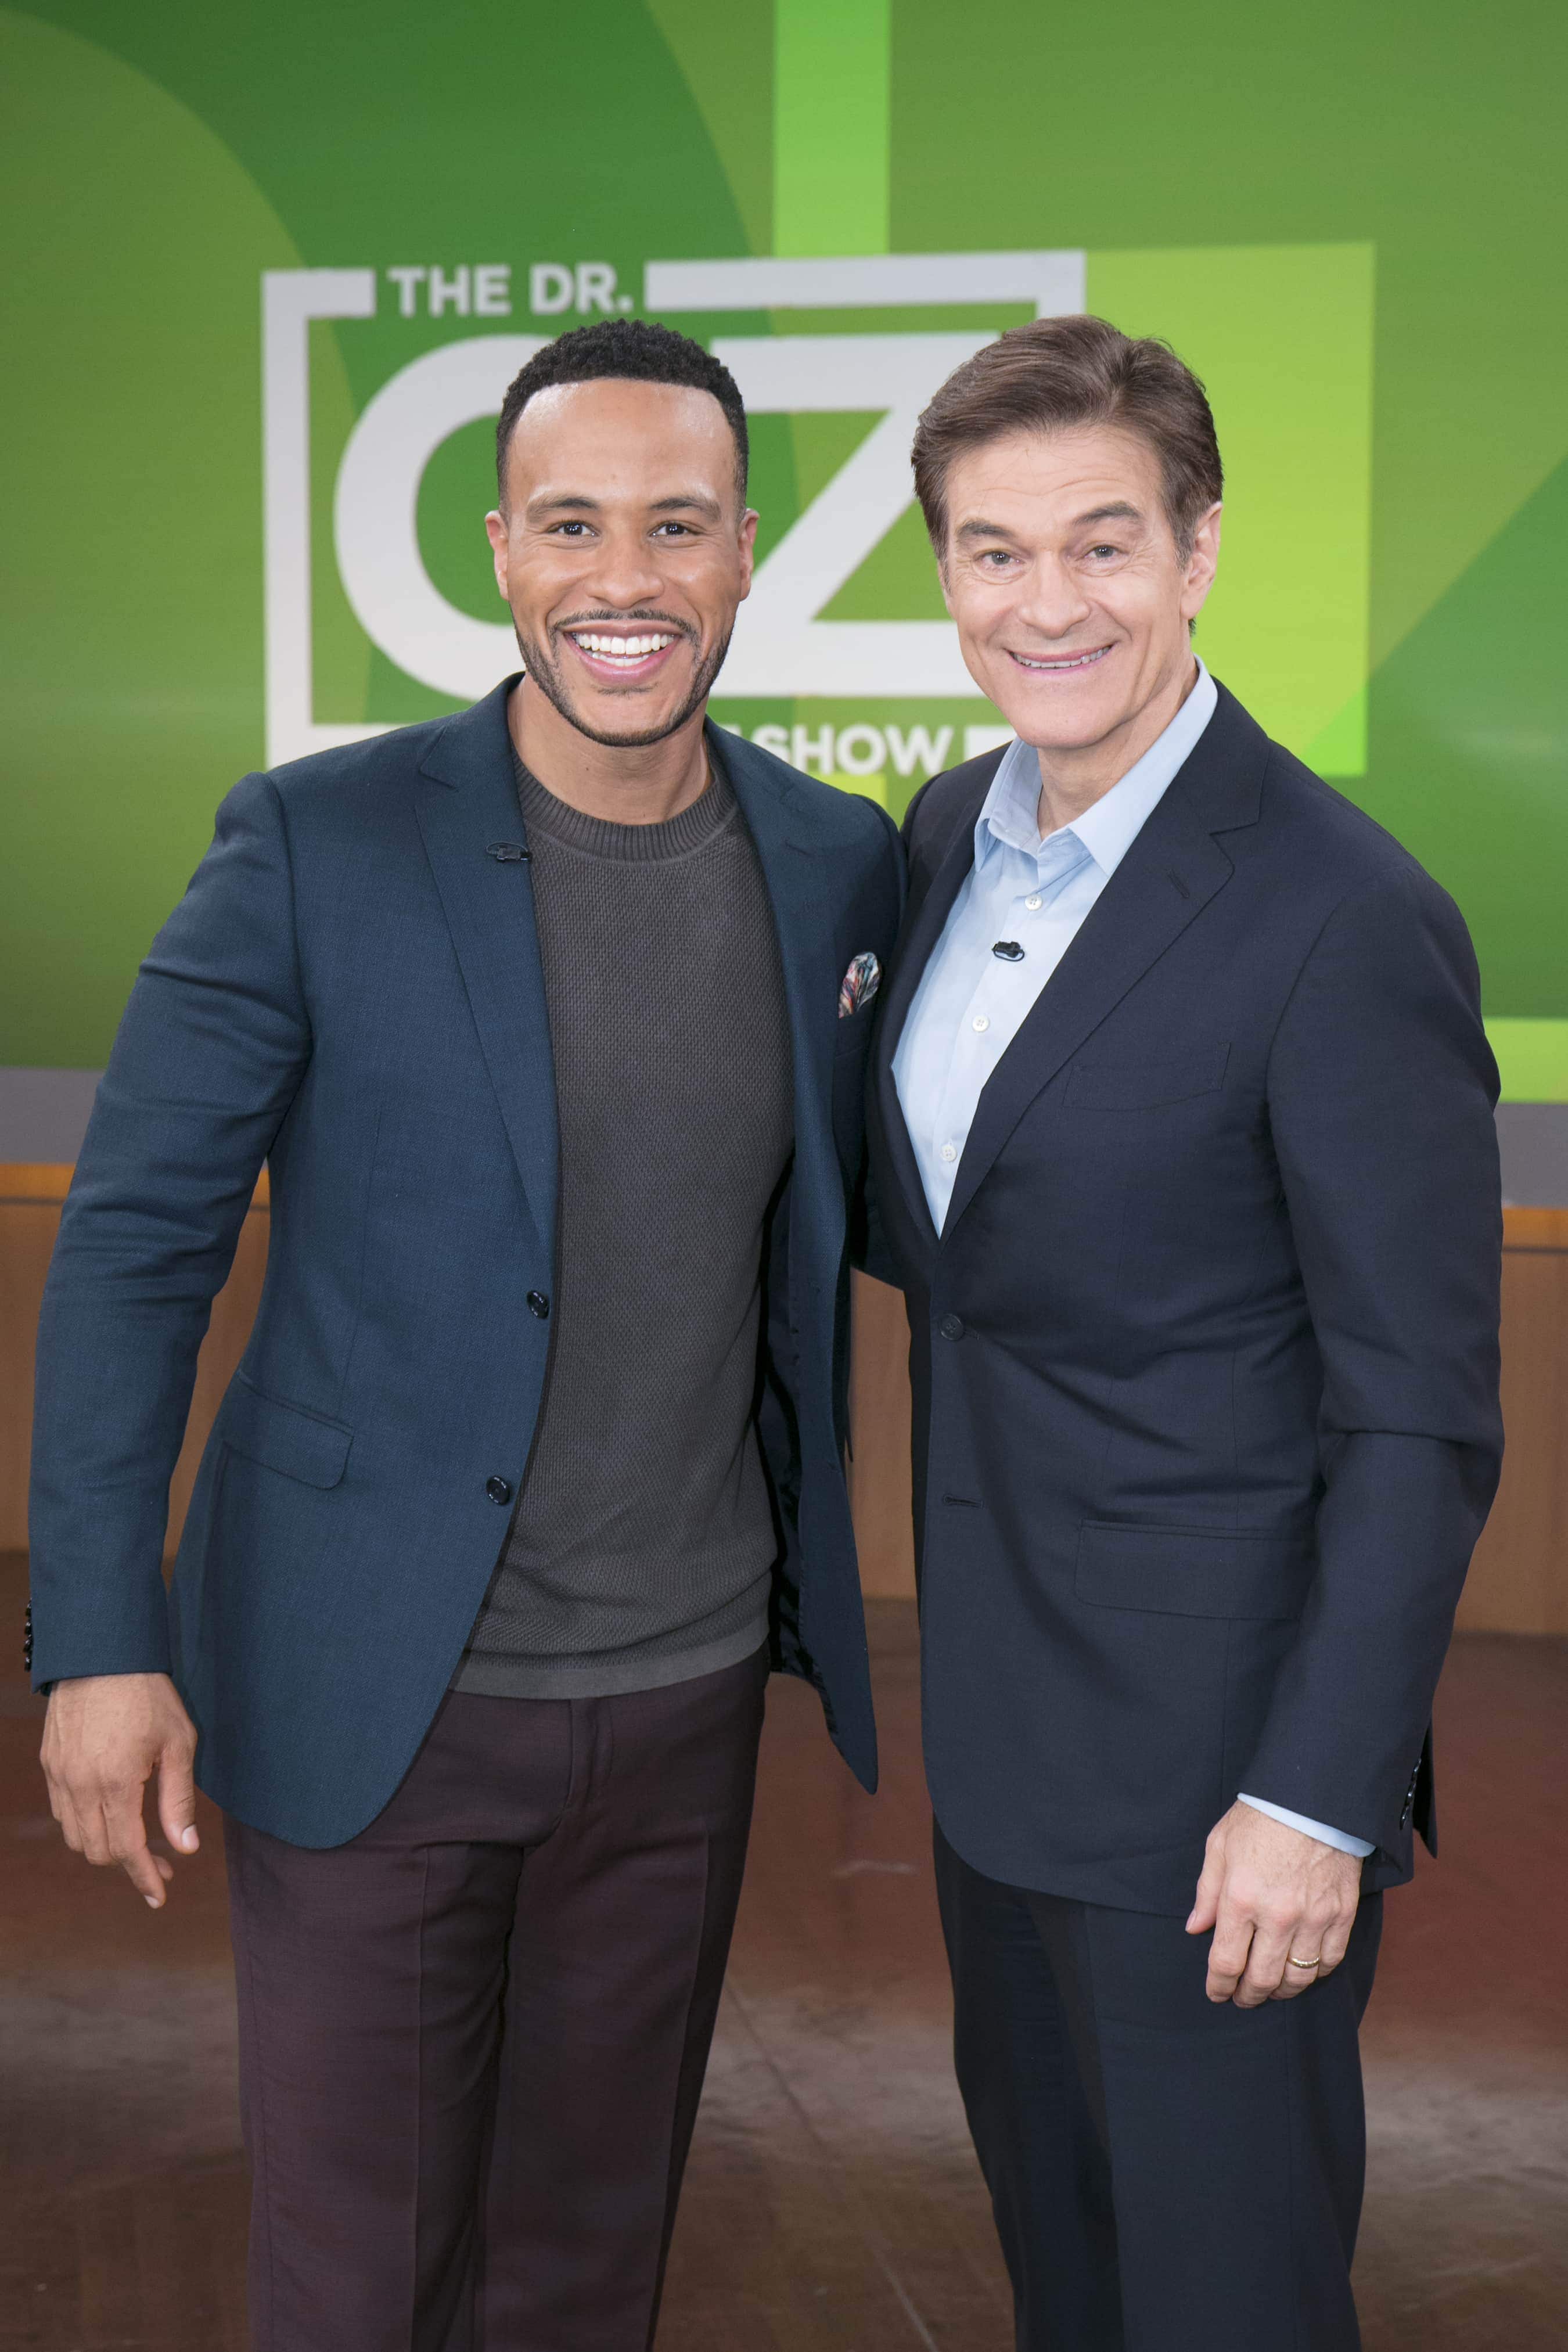 Seventh-day Adventist DeVon Franklin, at left, is bringing a message of faith to the nationally televised "Dr. Oz Show," hosted by cardiothoracic surgeon Dr. Mehmet Oz, at right. (Courtesy photo)